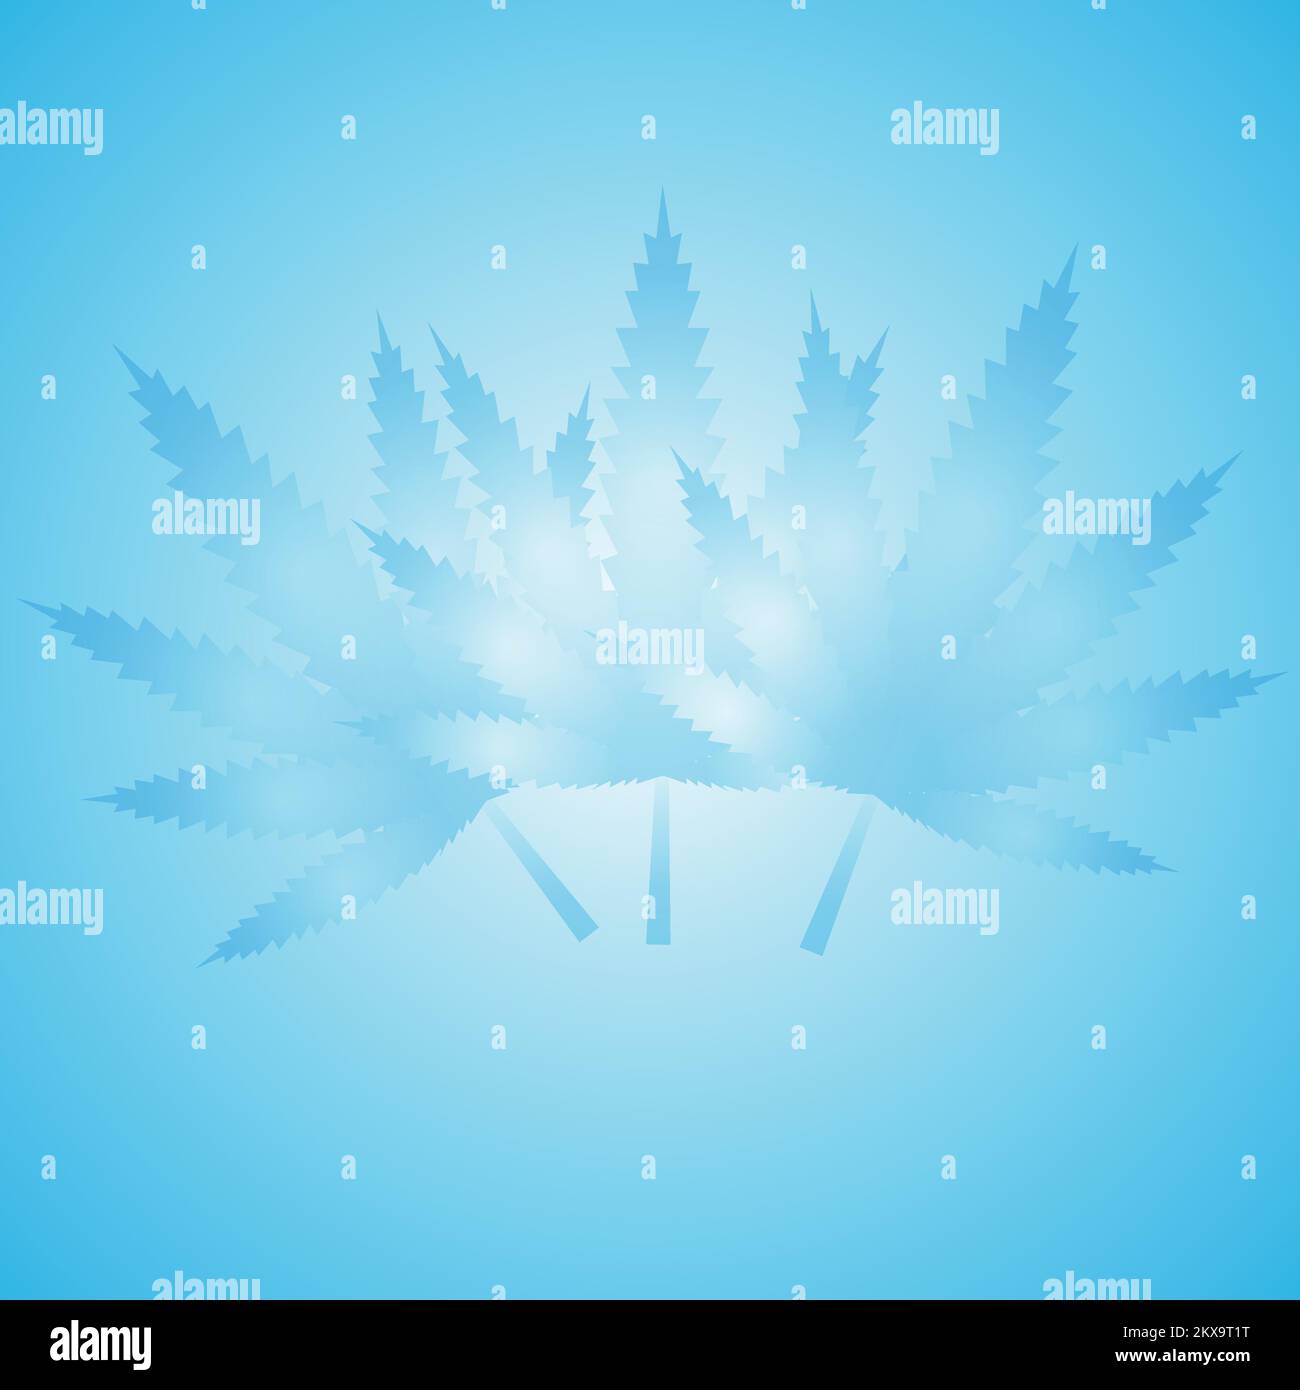 Vector background with cannabis leaves, in medical white-blue colors. Minimalistic style. Stock Vector